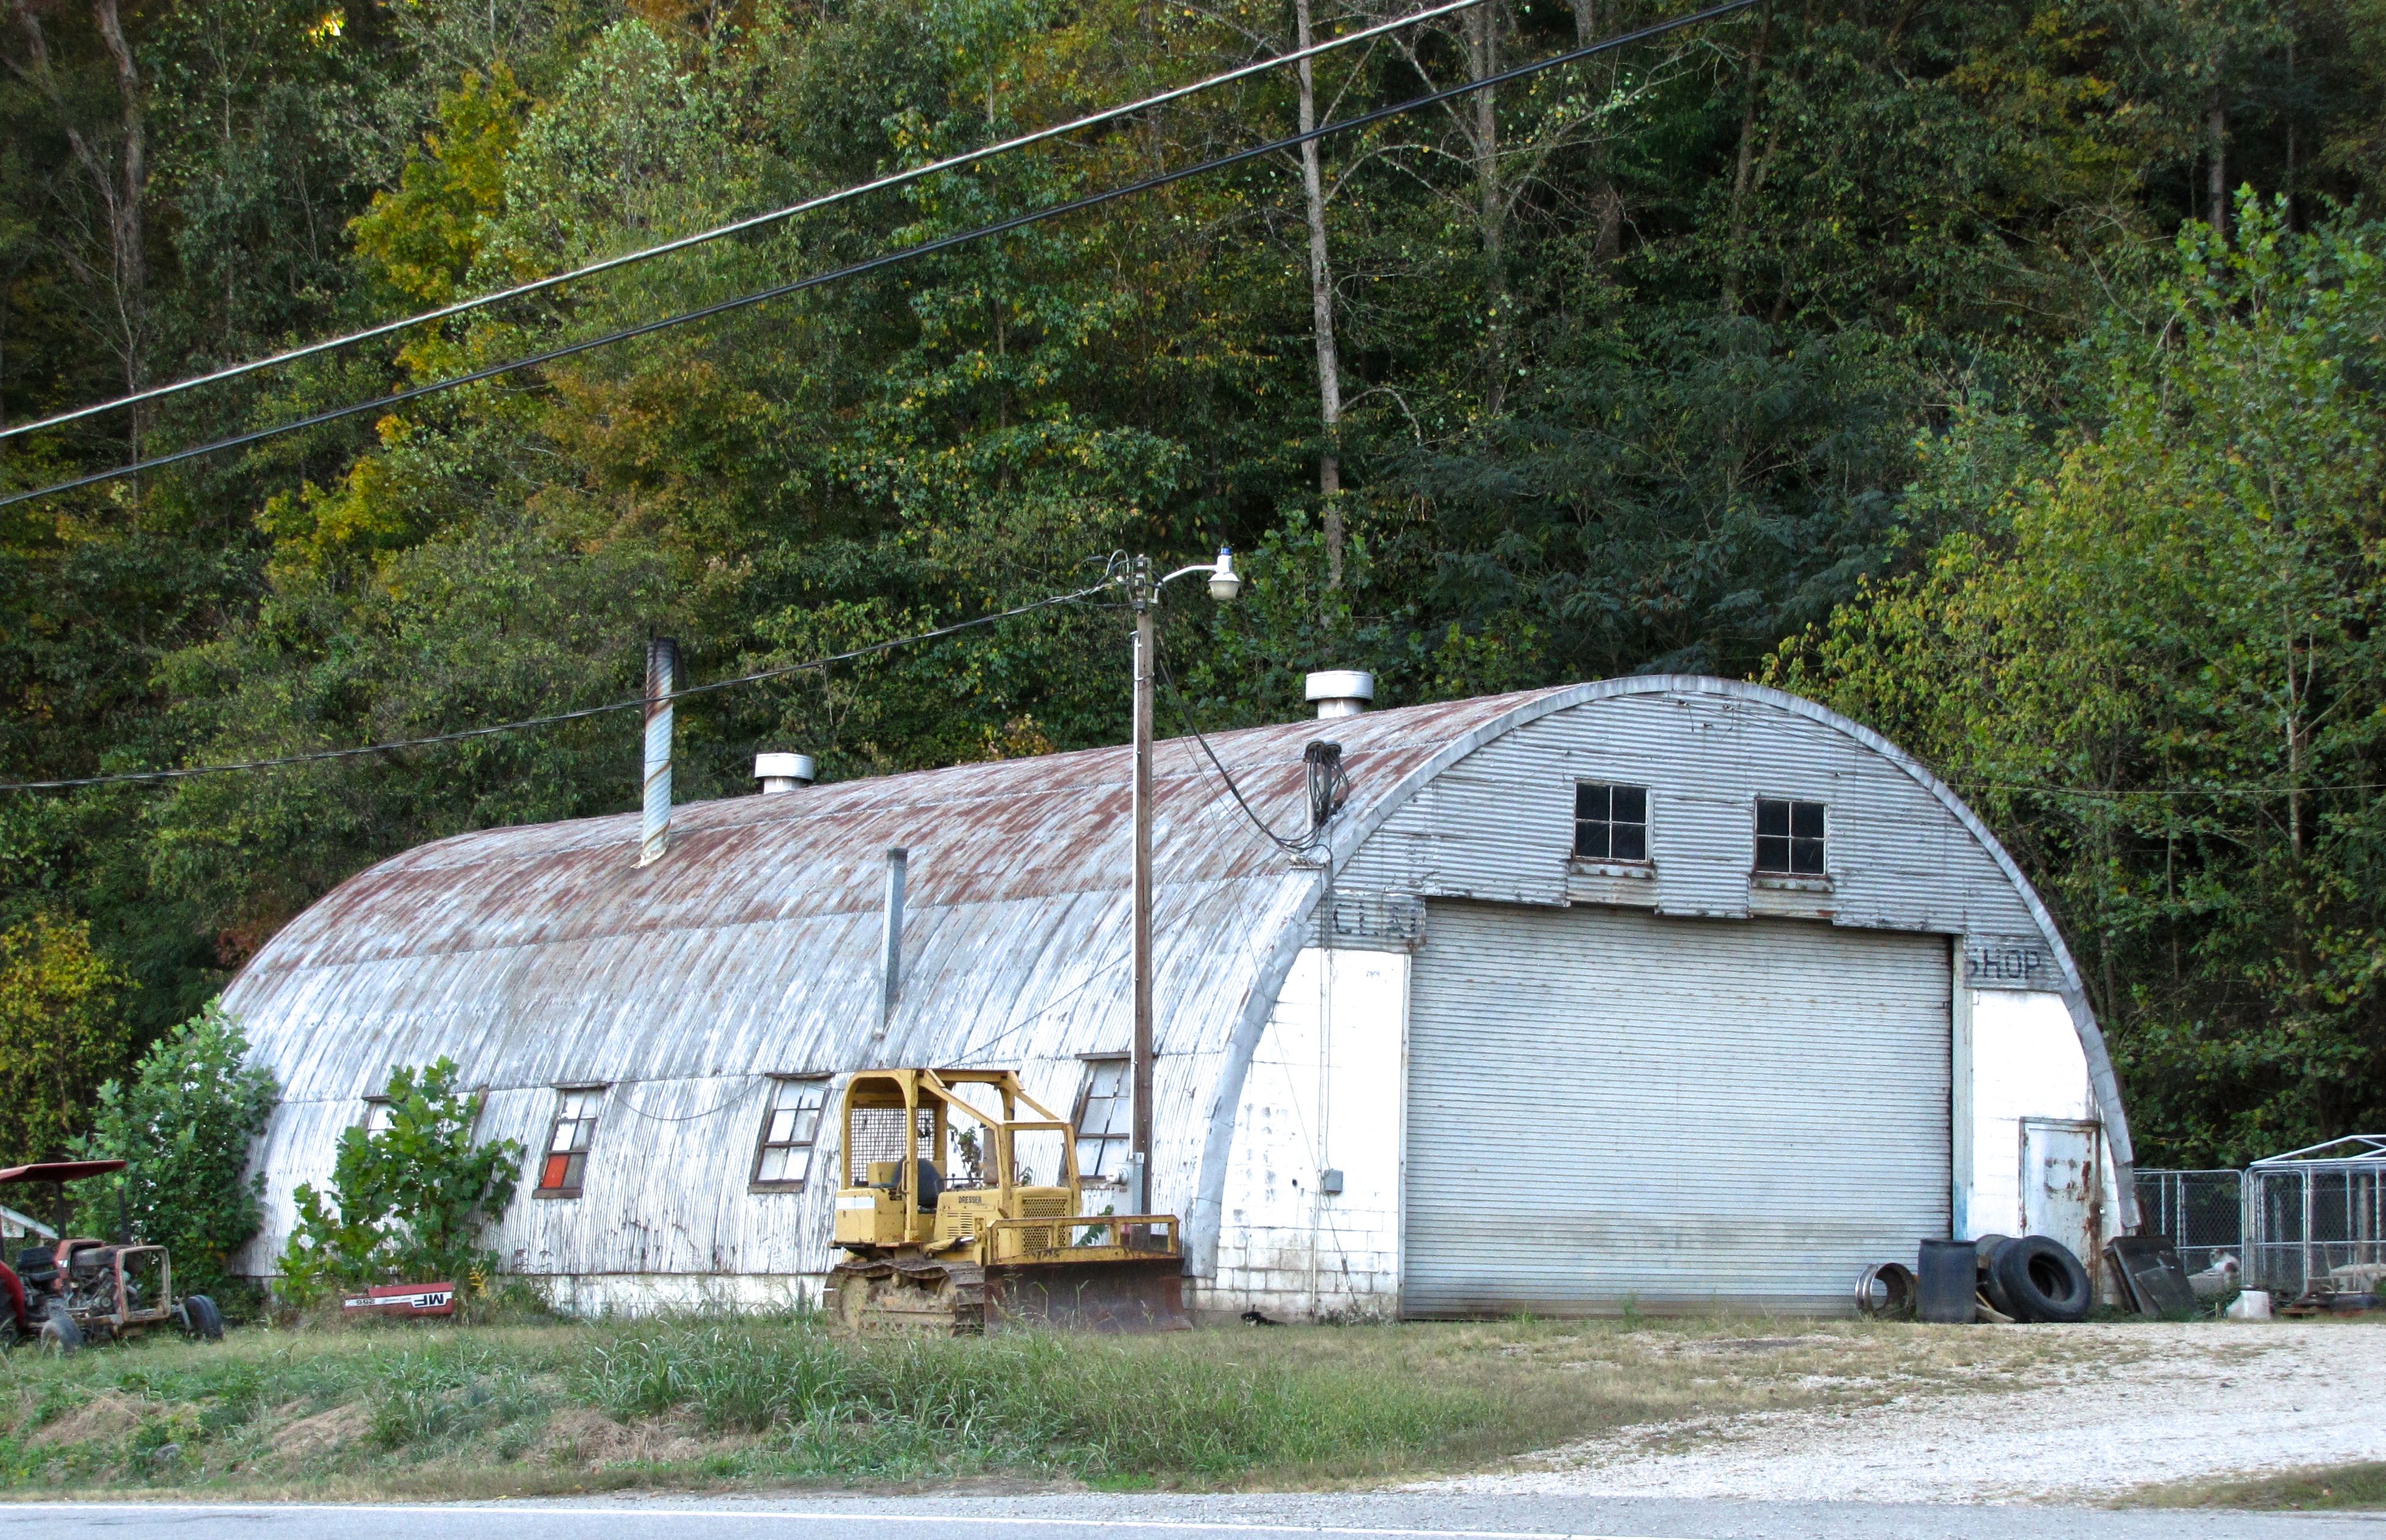 quonset hut in Terms Of Service, OH